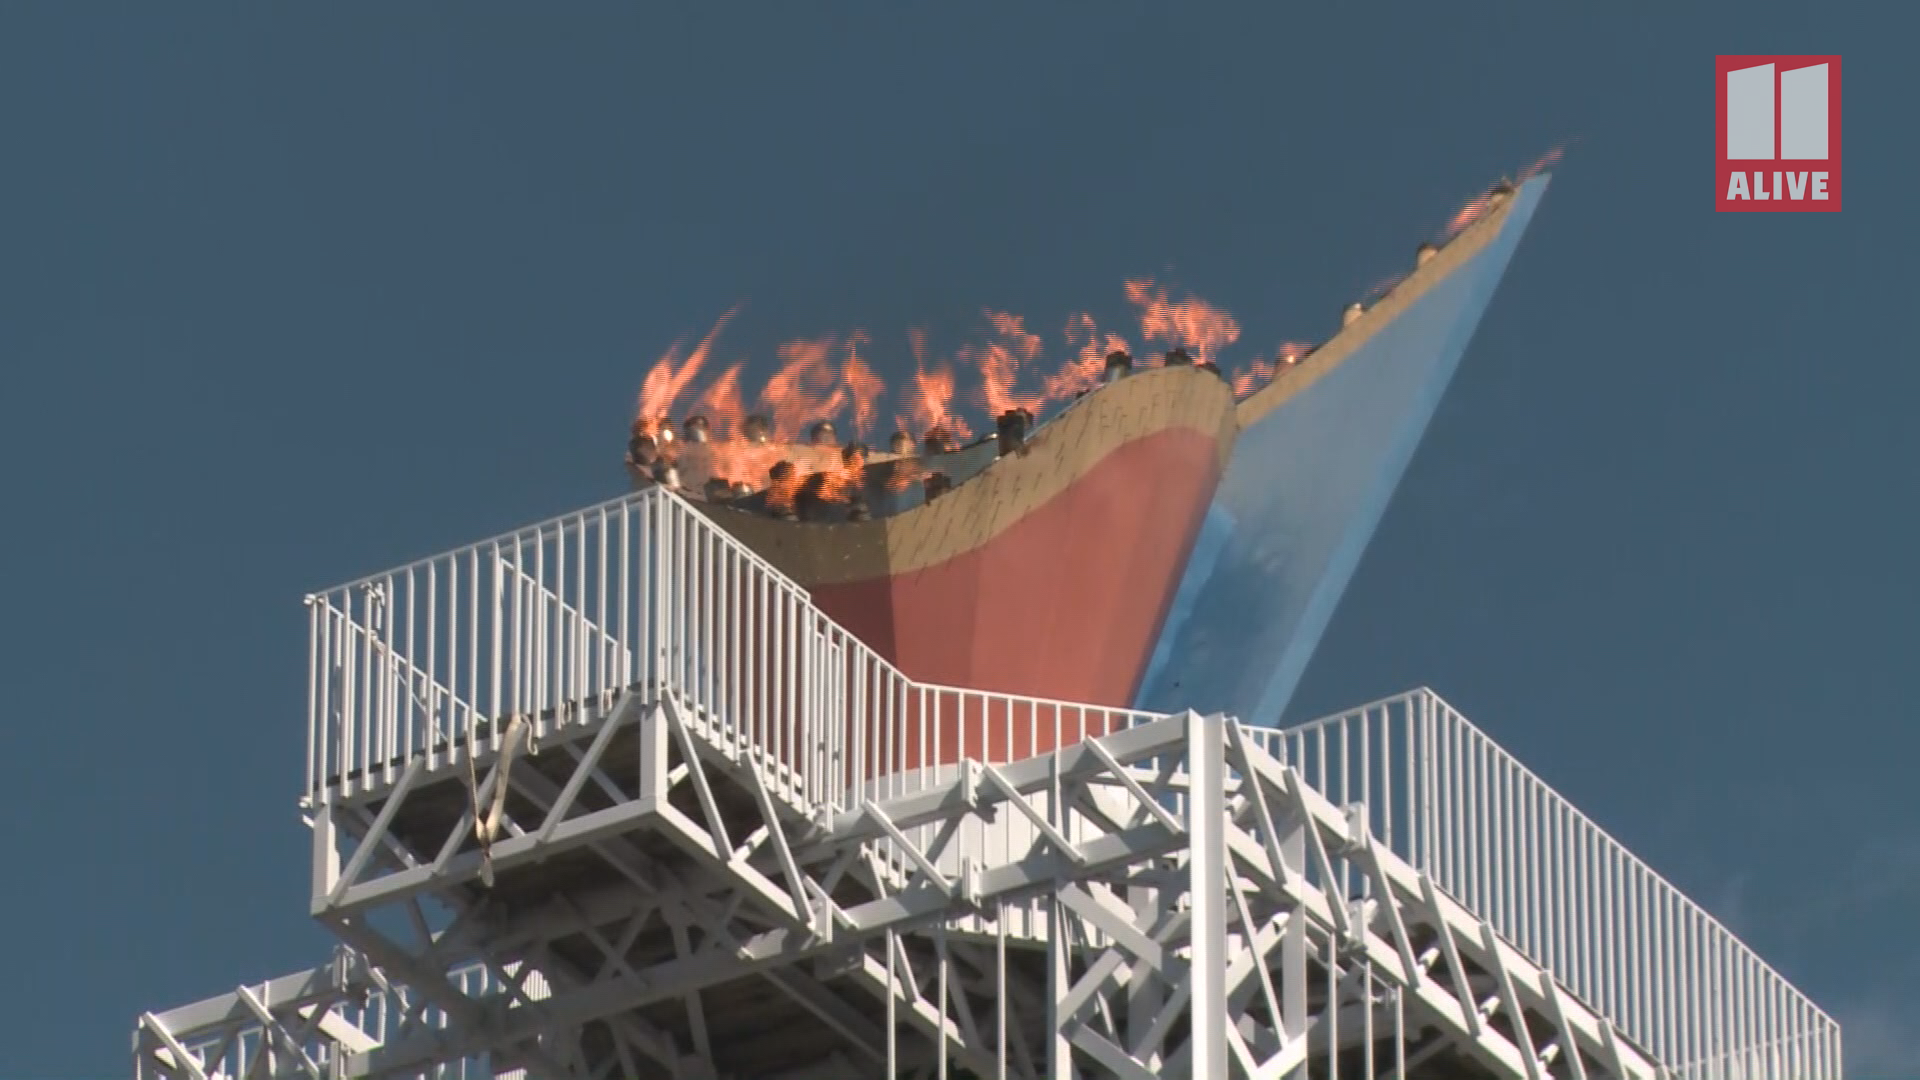 Atlanta's Olympic cauldron, which last burned over a competition during the 1996 Summer Games, was ignited on Saturday ahead of the 2020 US Olympic Marathon Trials.